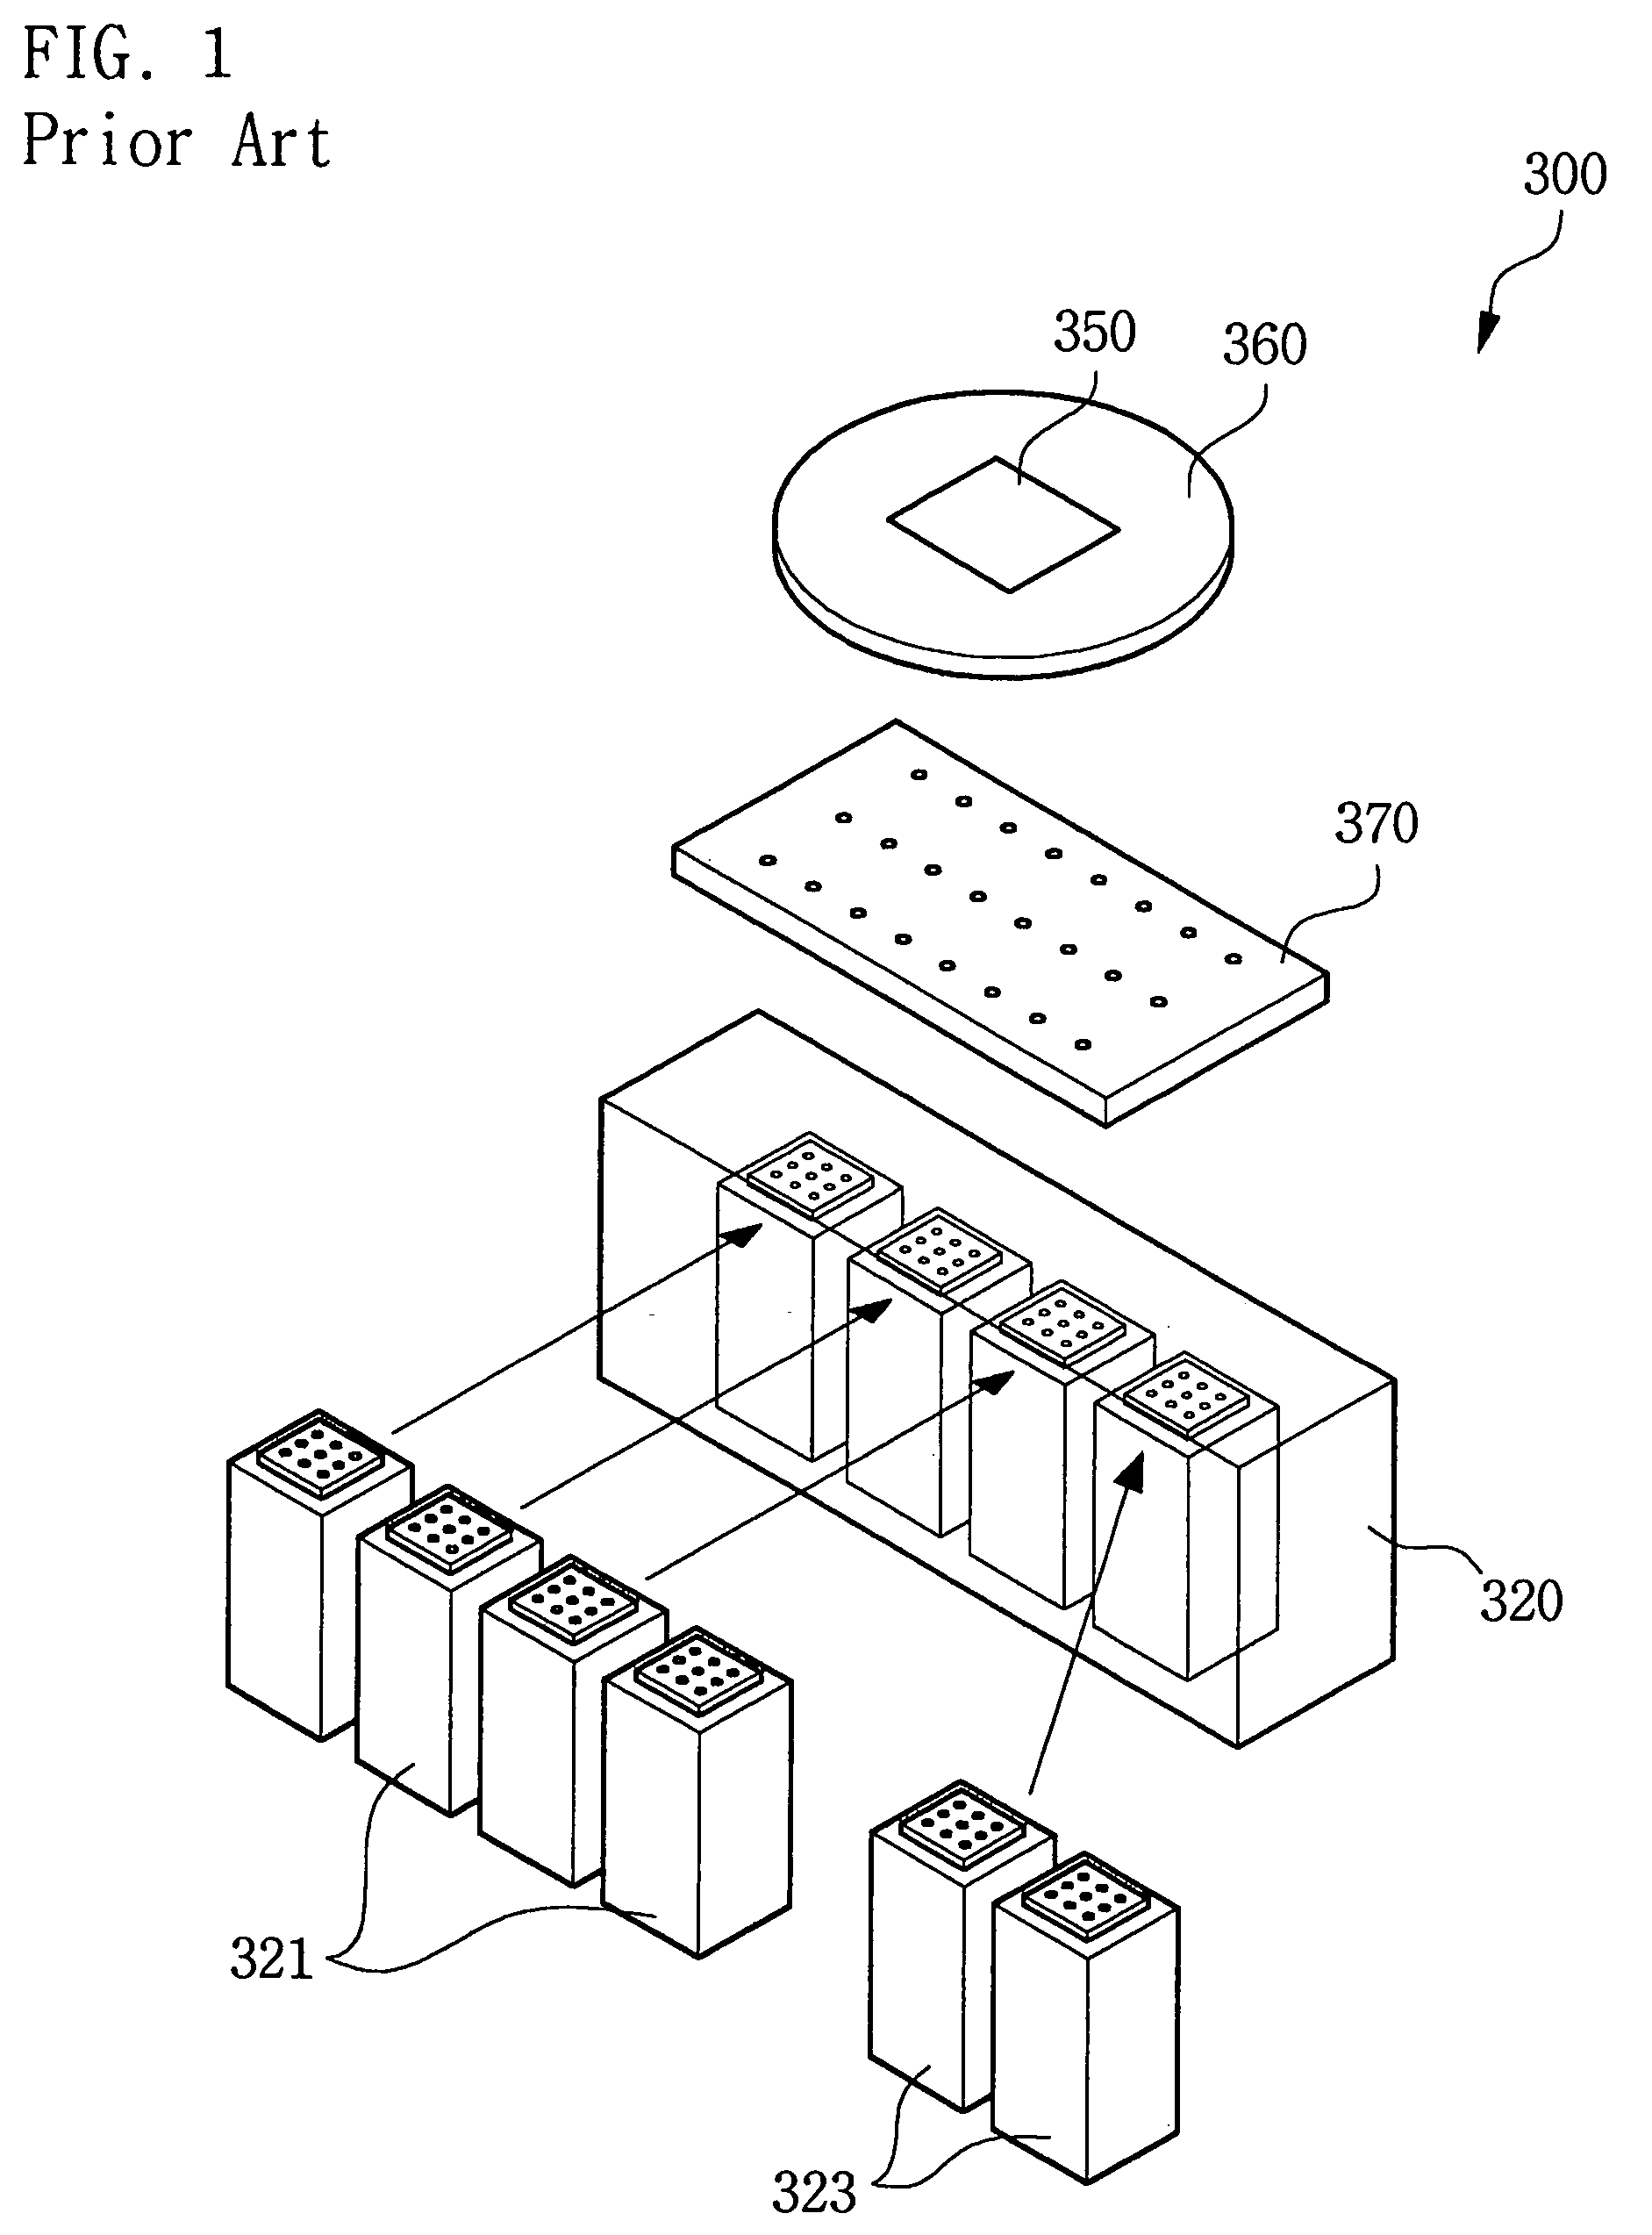 Test apparatus for mixed-signal semiconductor device